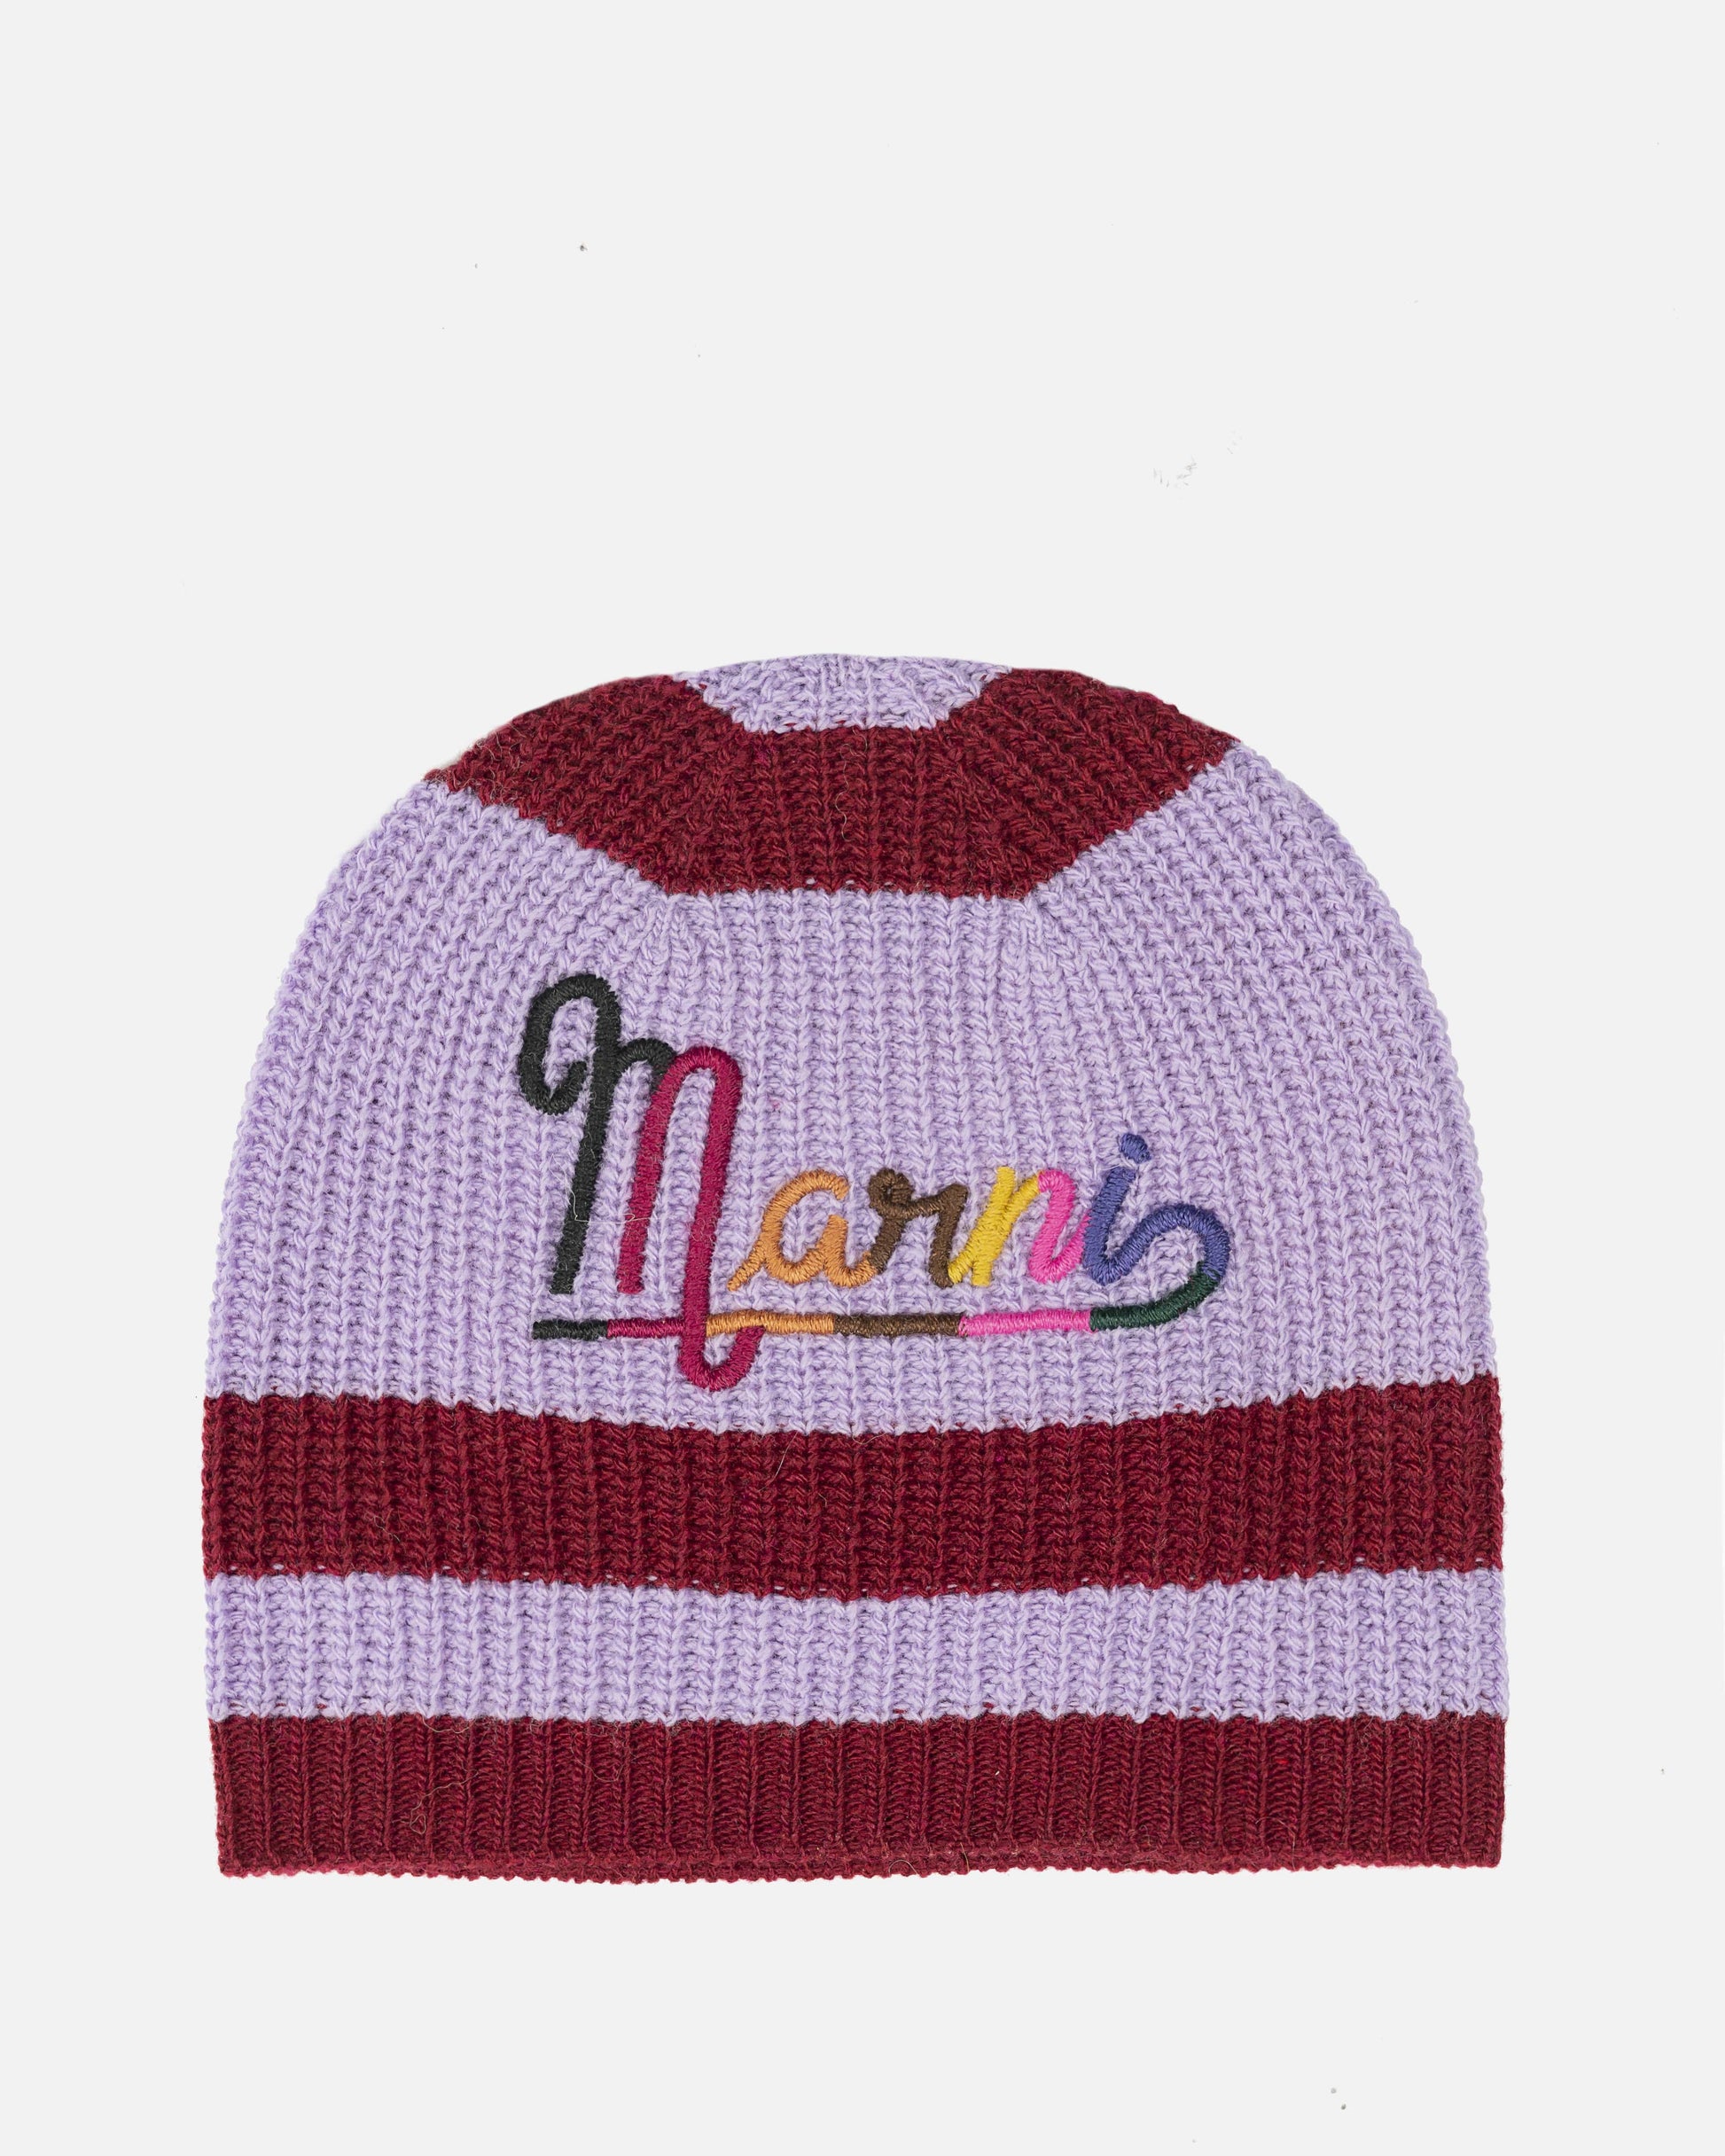 Marni Men's Hats Embroidered Logo Beanie in Multi